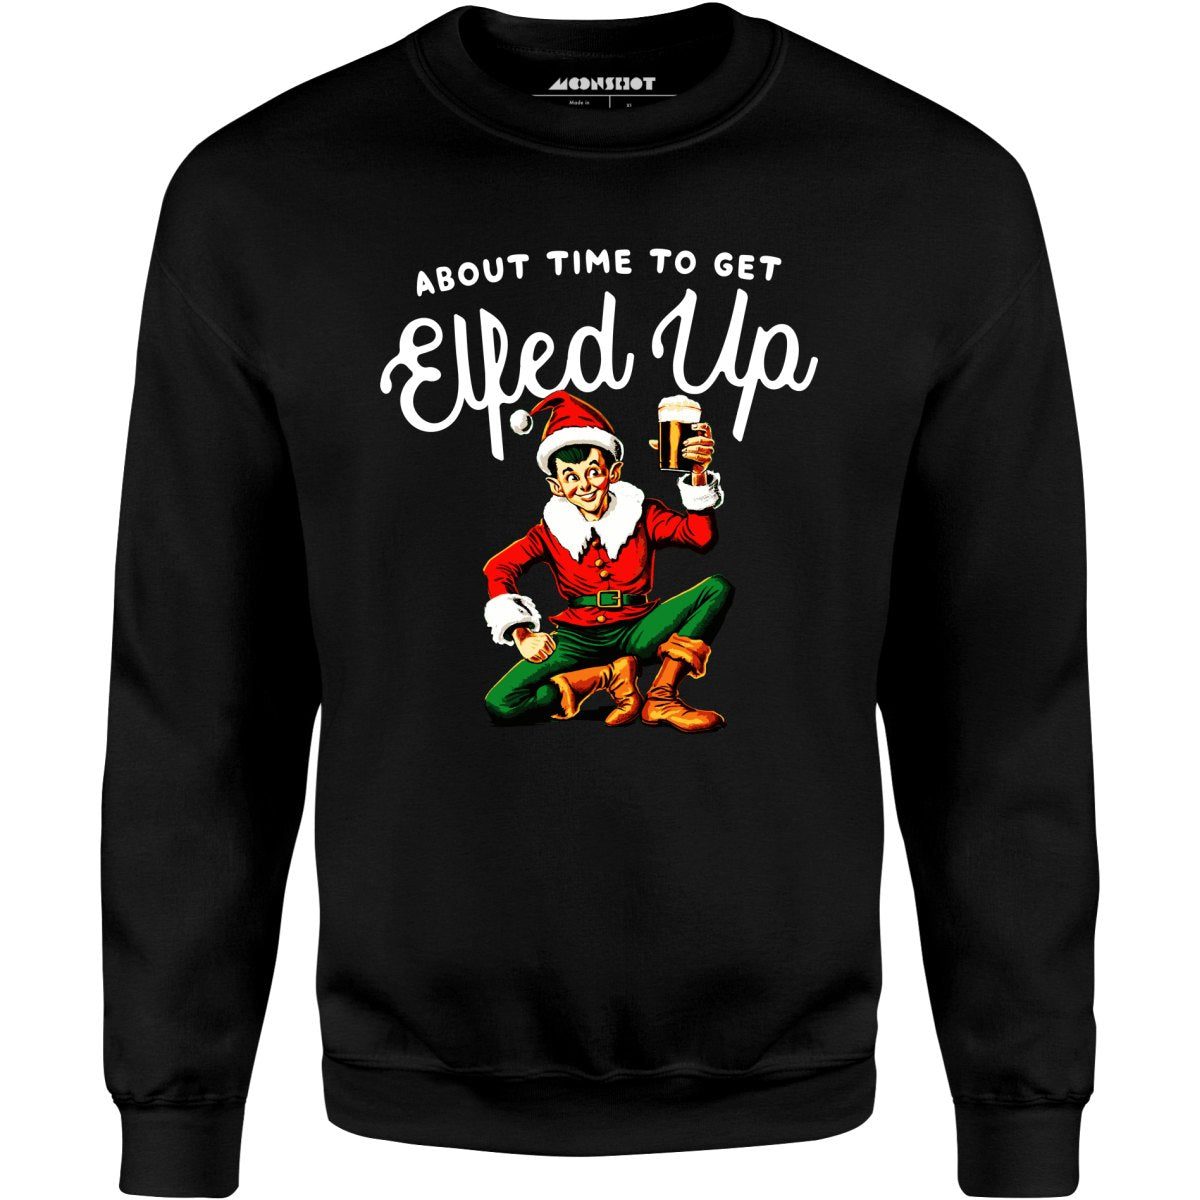 About Time to Get Elfed Up - Unisex Sweatshirt